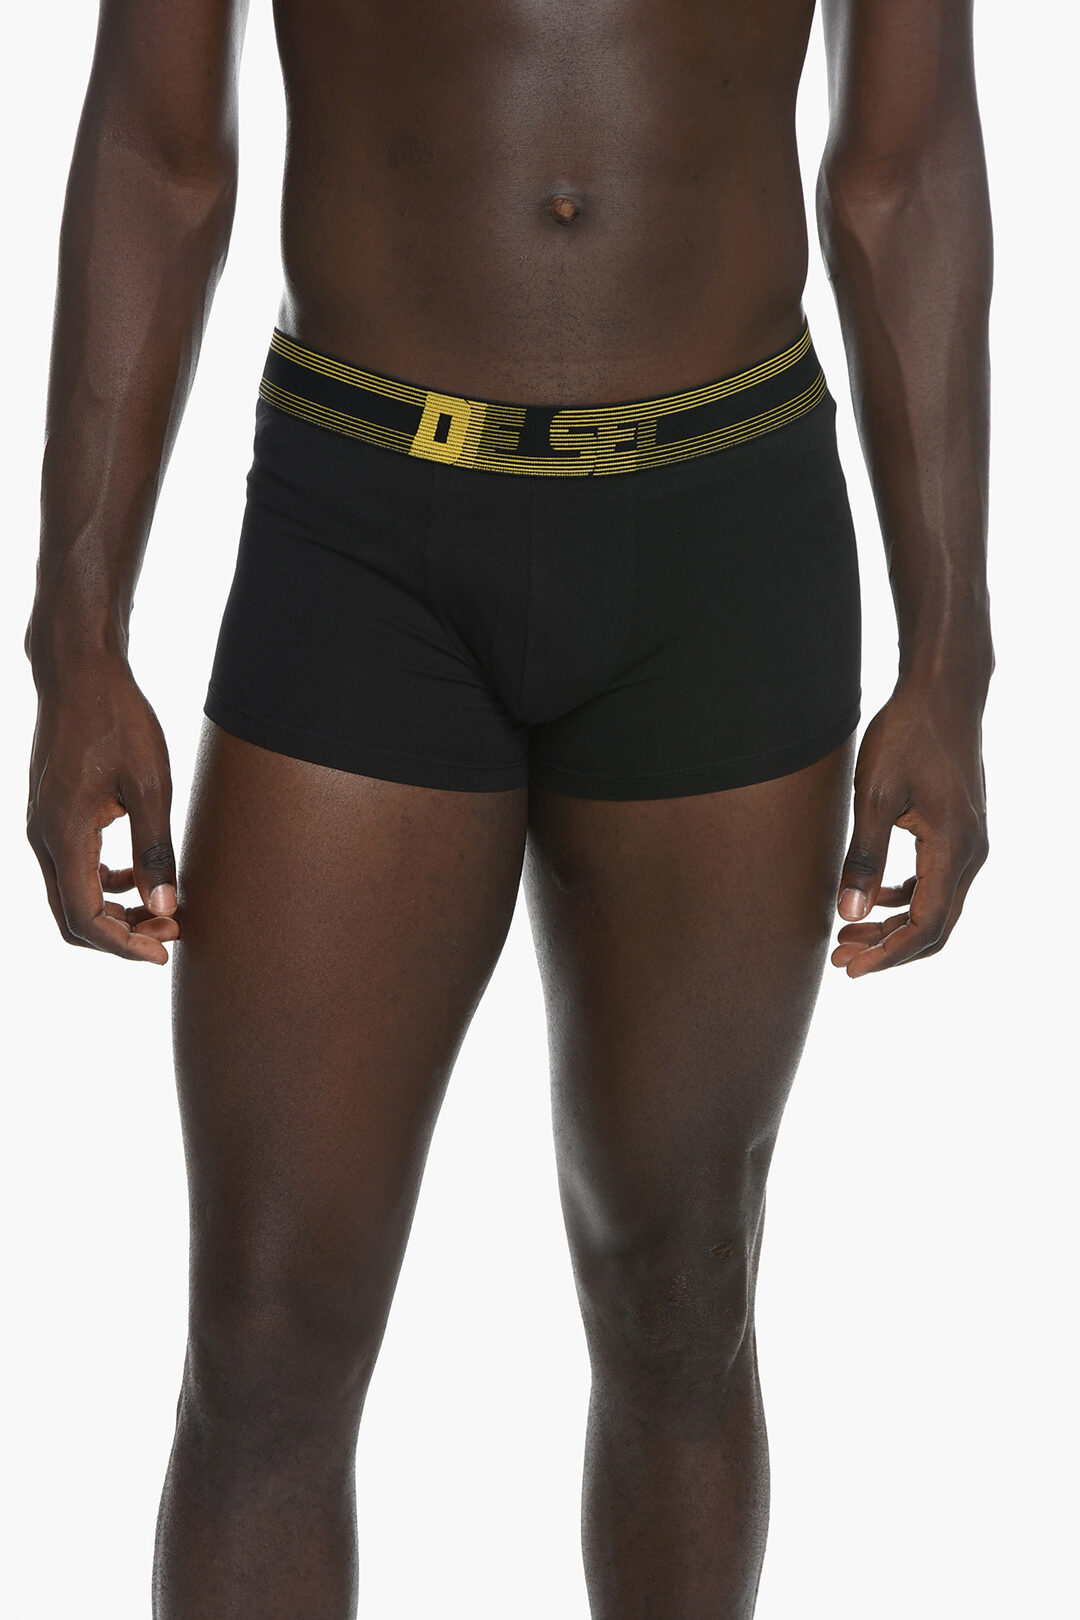 Diesel Logoed at the Waist UMBX-DAMIEN 3 Pairs of Boxers Set men - Glamood  Outlet